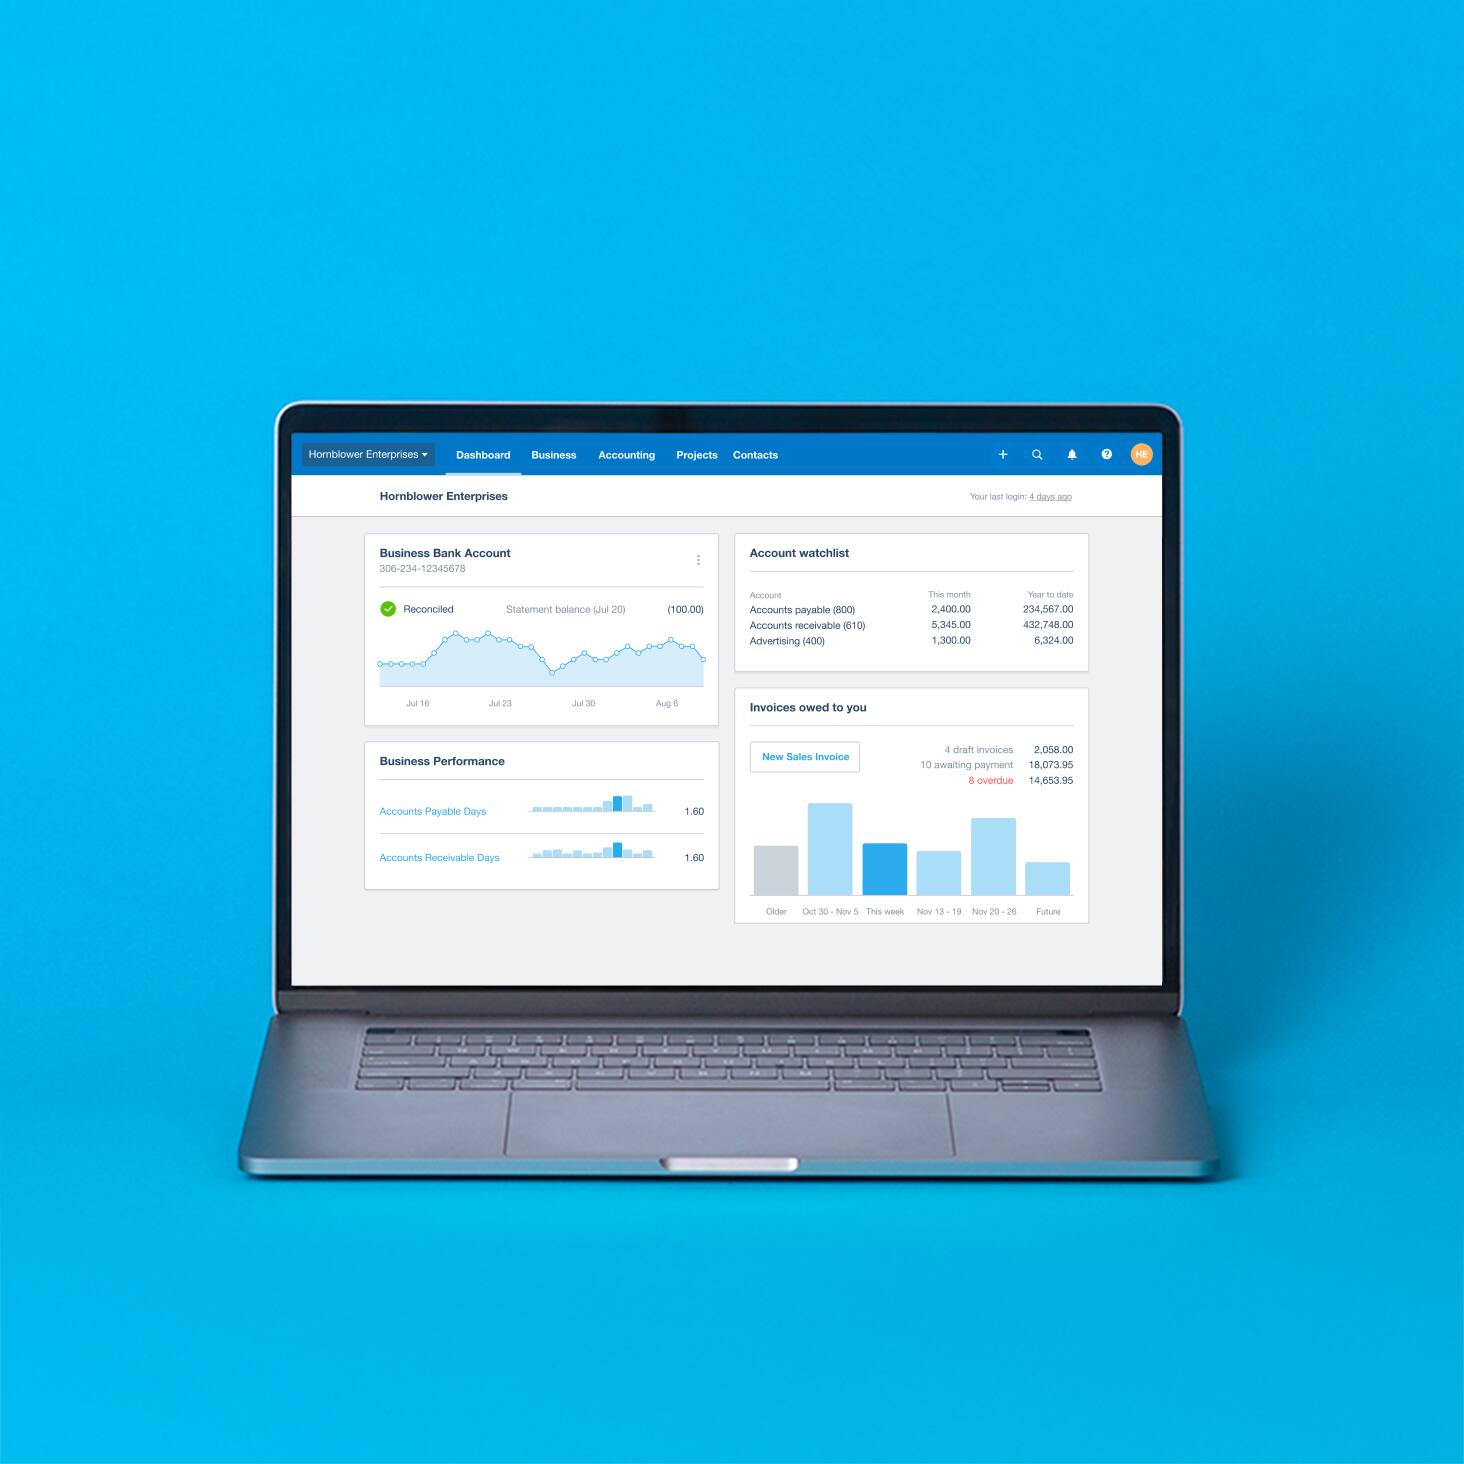 The Xero dashboard displays charts and tables on a laptop.